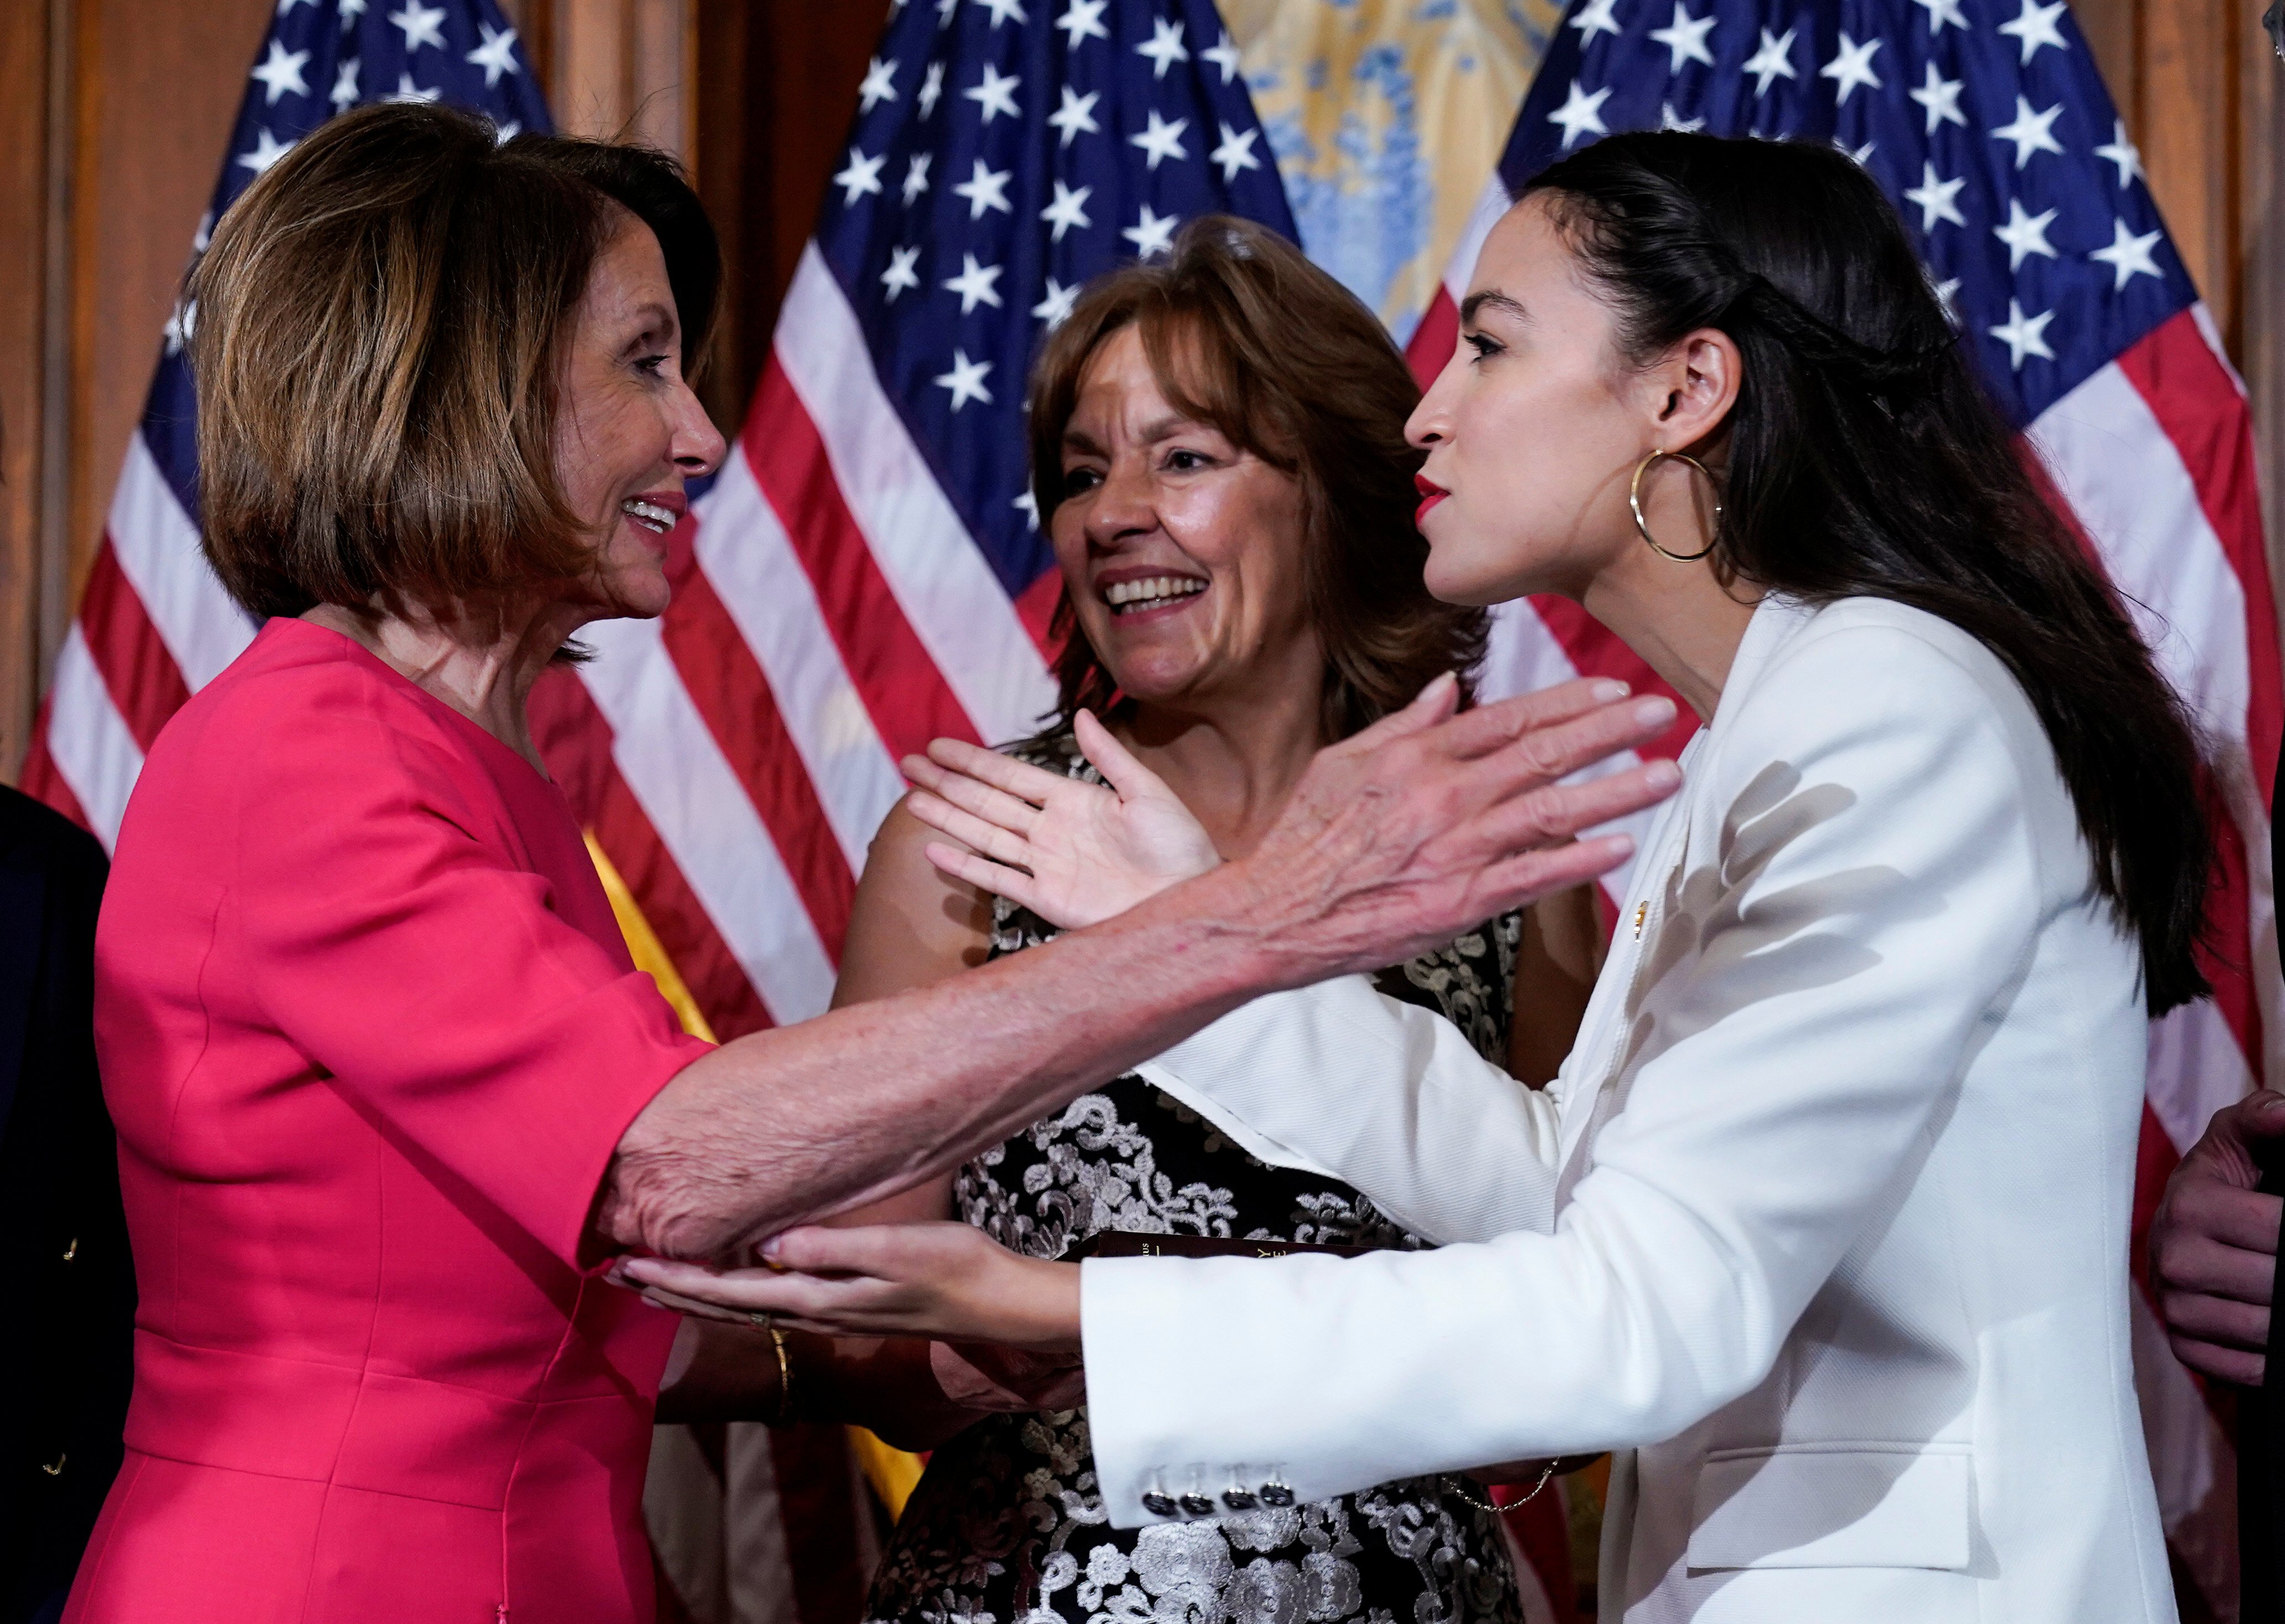 Rep. Alexandria Ocasio-Cortez (D-NY) greets Speaker of the House Nancy Pelosi (D-CA) before a ceremonial swearing-in picture on Capitol Hill in Washington